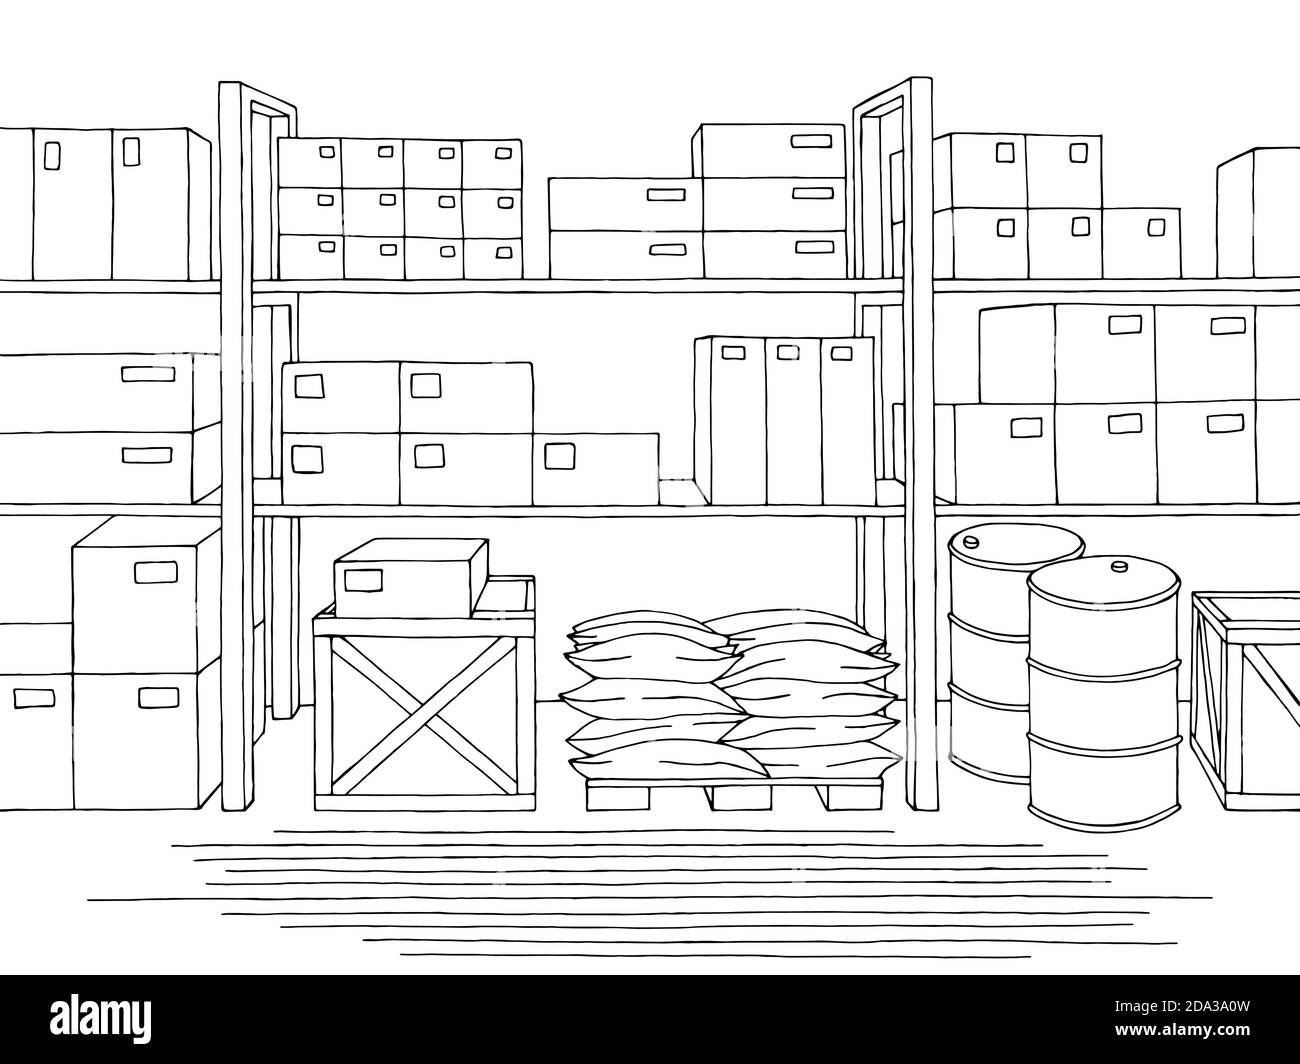 7,527 Warehouse Storage Drawing Images, Stock Photos, 3D objects, & Vectors  | Shutterstock